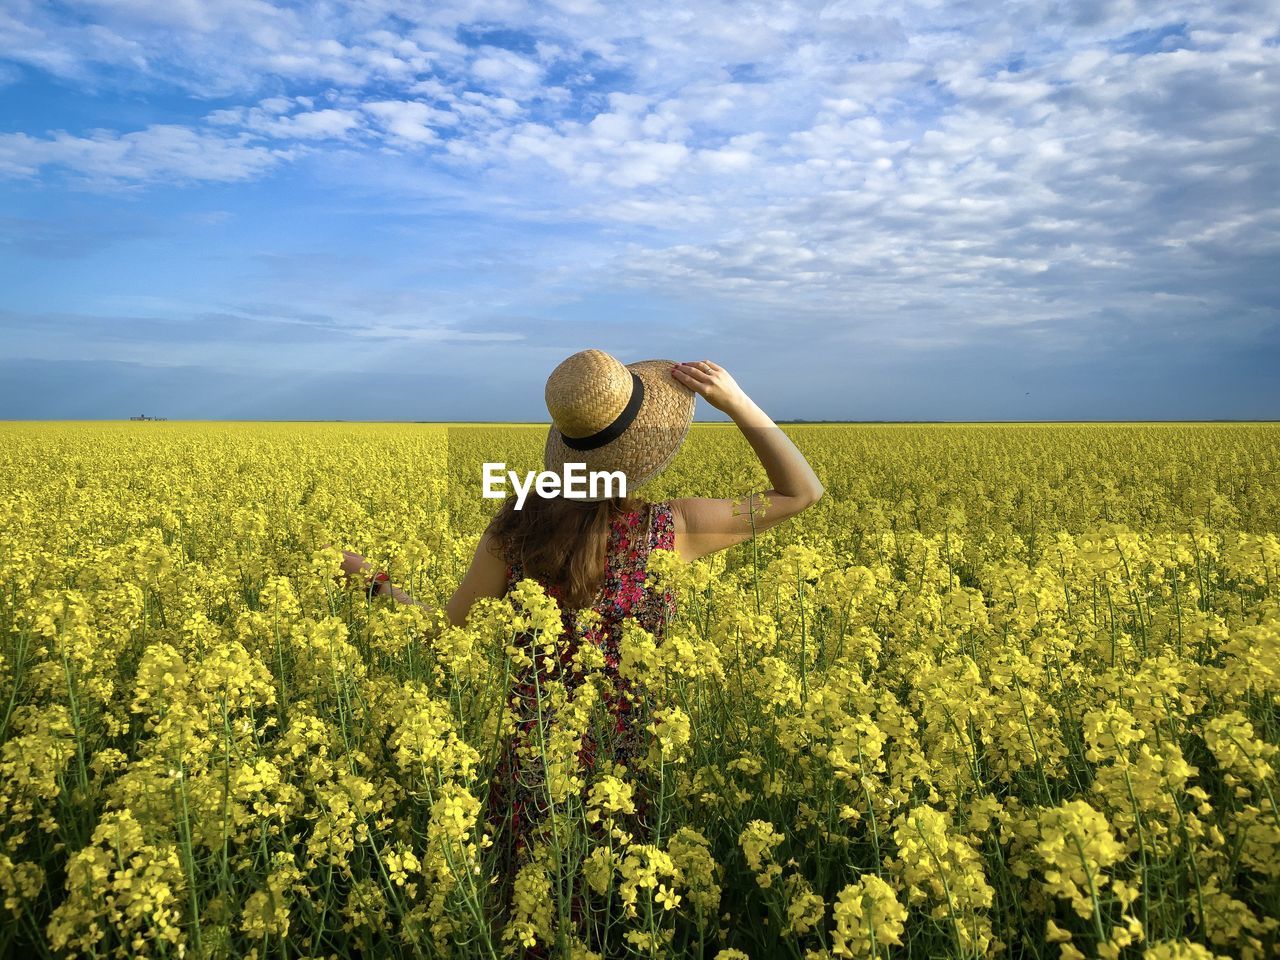 Rear view of woman wearing dress and hat in a field of canola flowers on a cloudy day